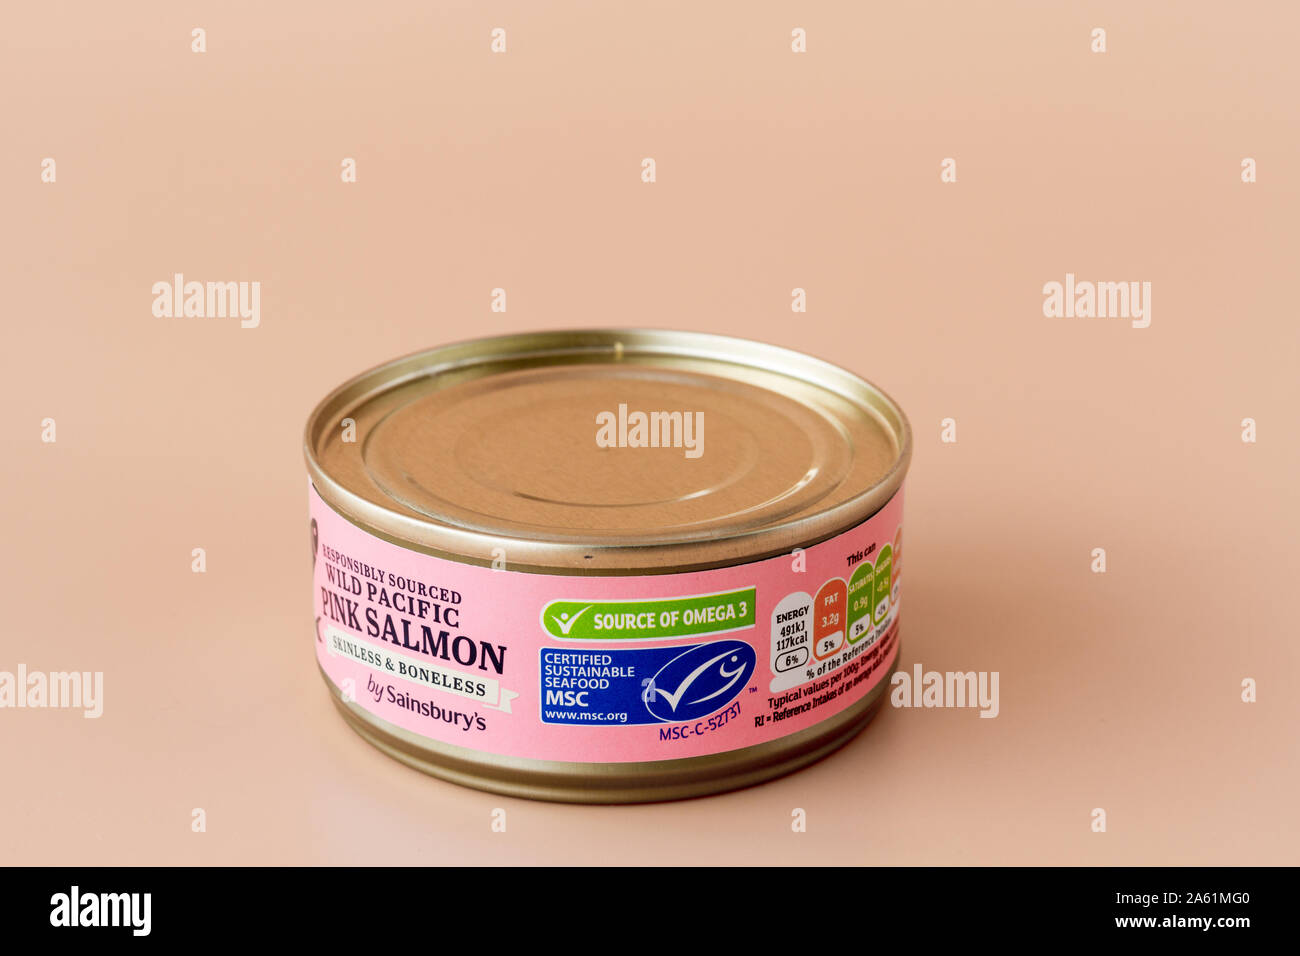 Tin of responsibly sourced wild pacific pink salmon by Sainsbury's. Source of omega 3. MSC label Stock Photo